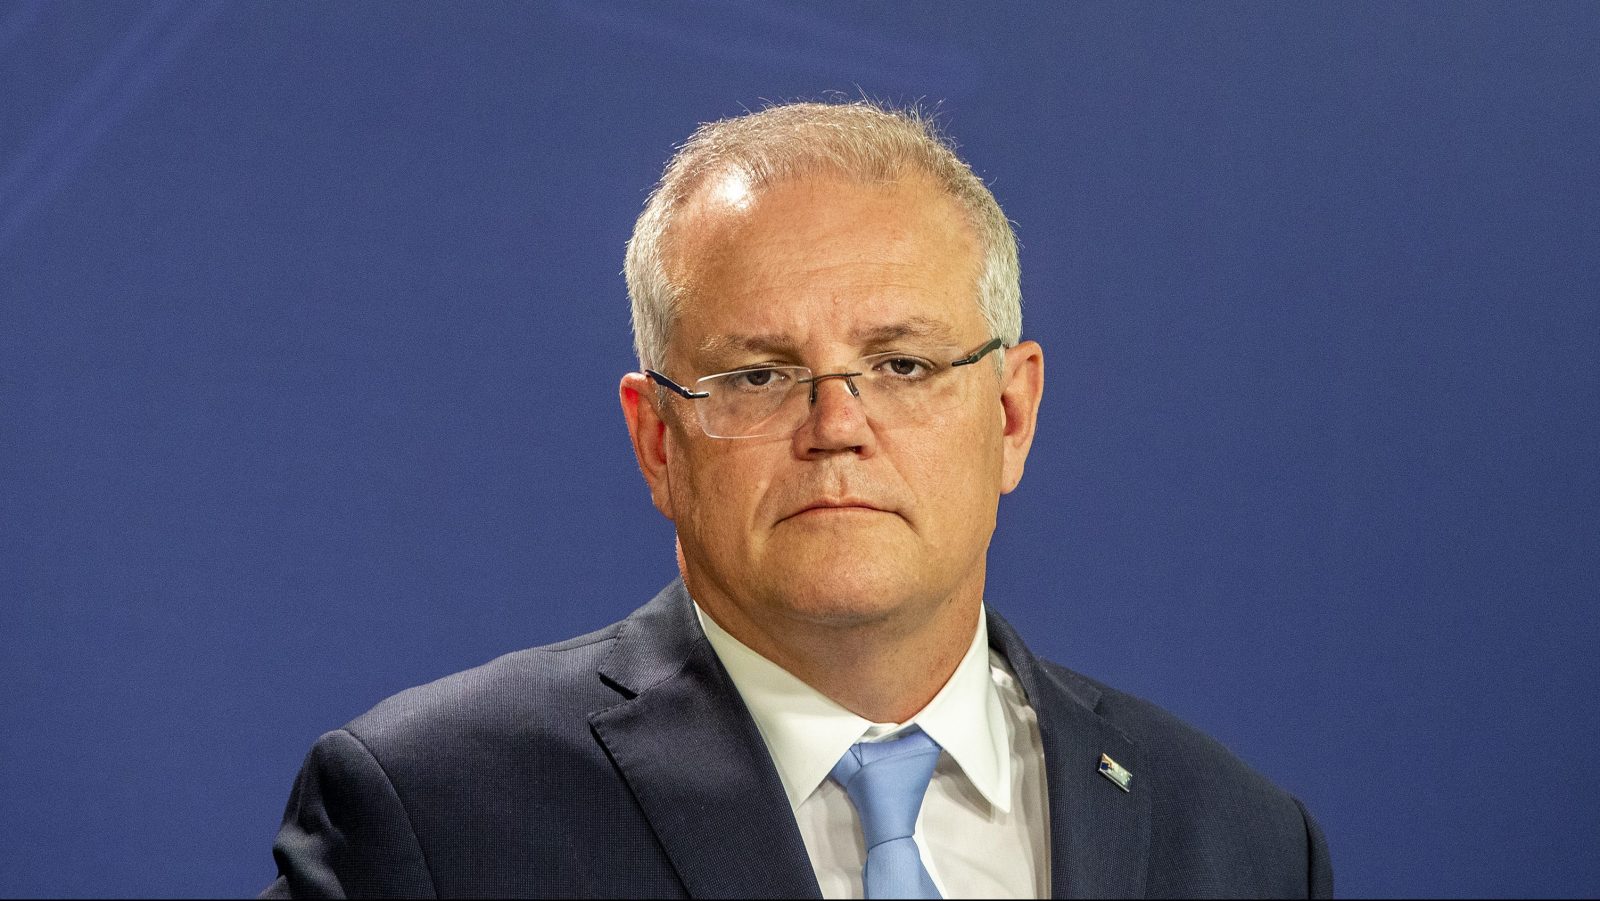 Australians prime minister an ignoring wildfire victims | Grist